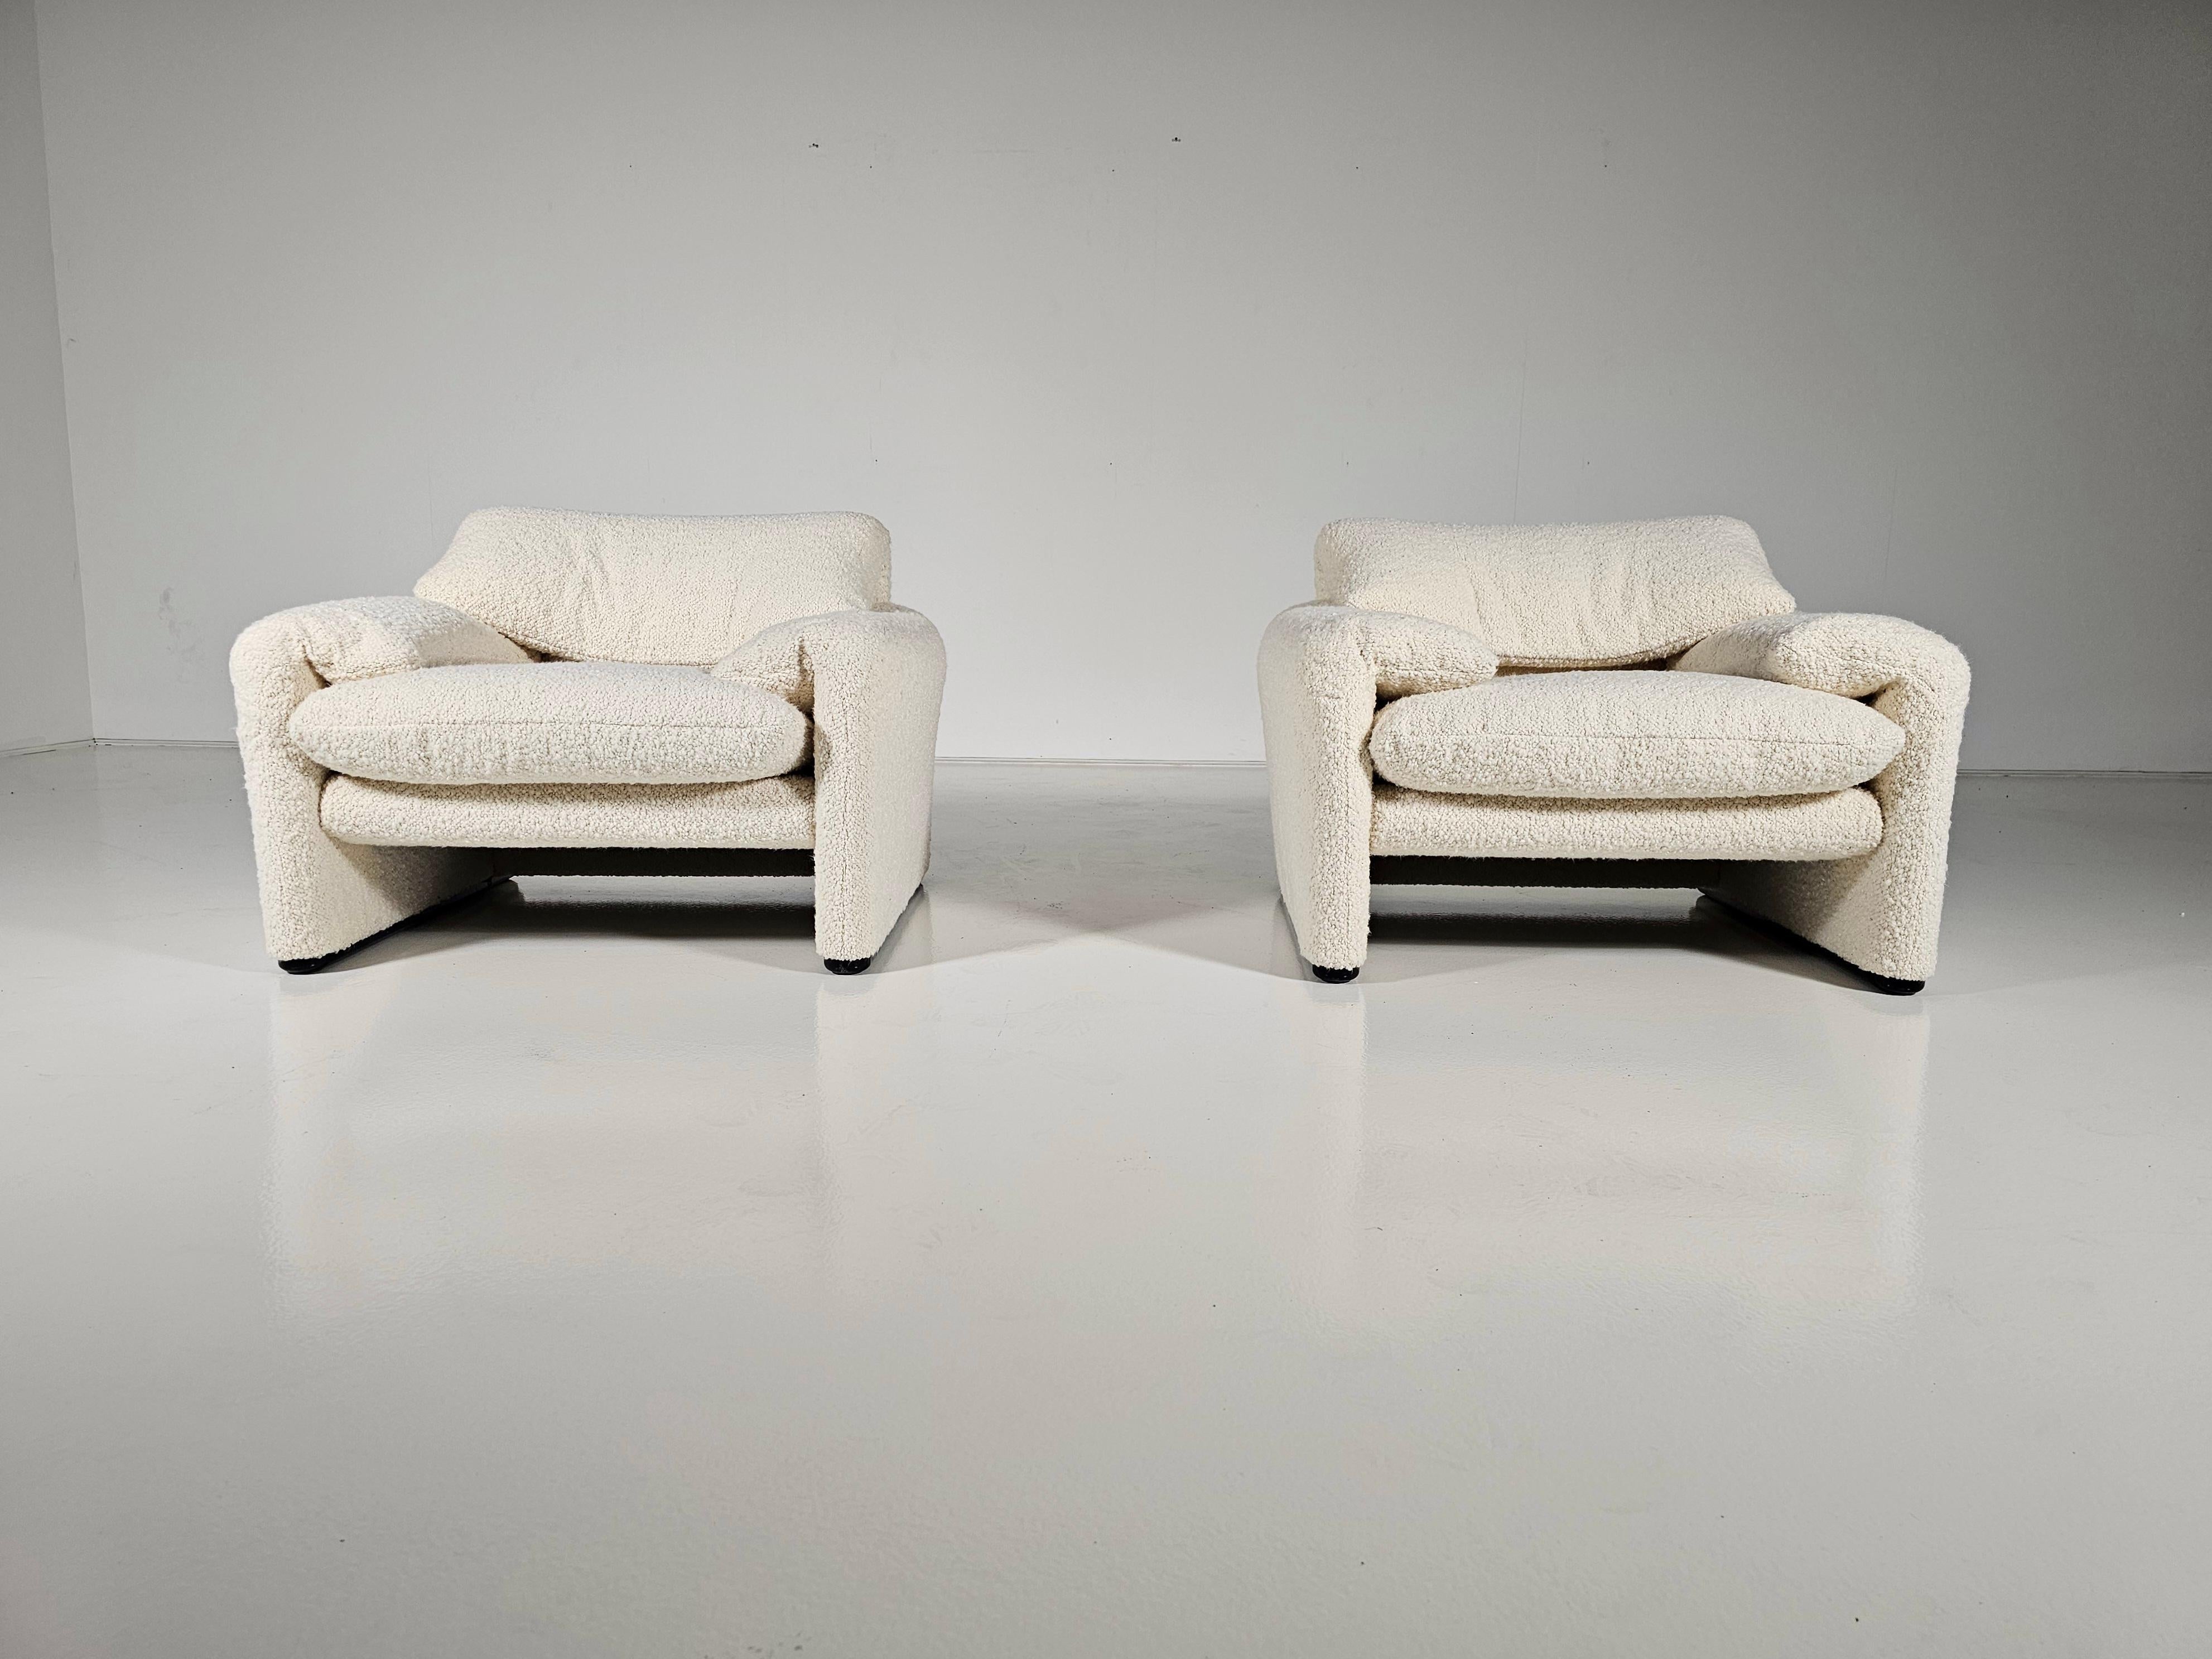 Late 20th Century Maralunga Chairs in cream boucle by Vico Magistretti for Cassina, 1970s